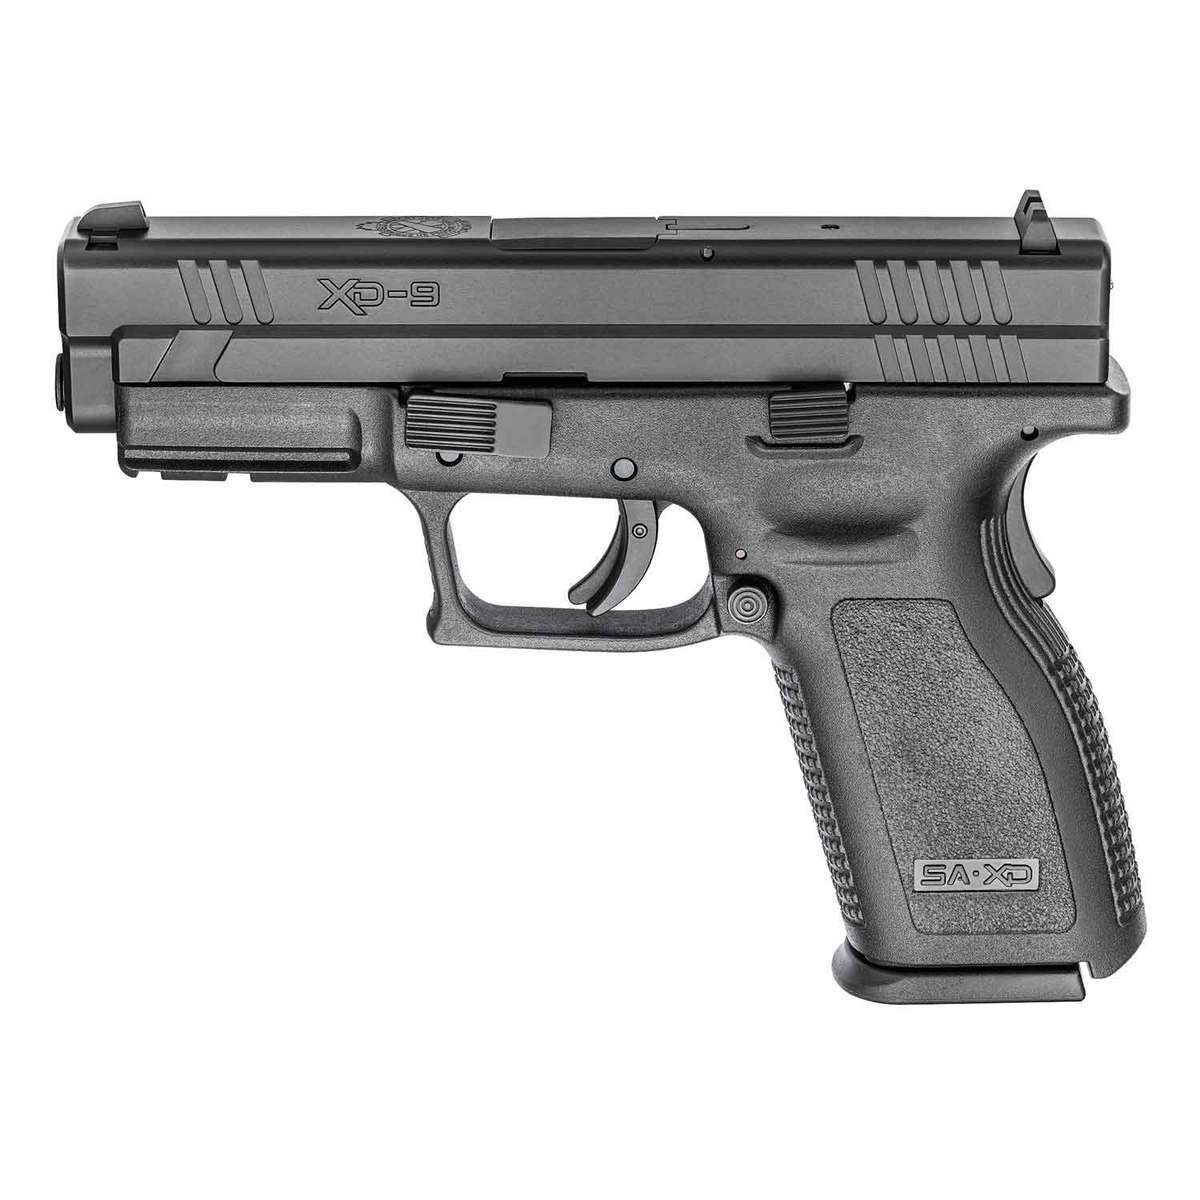 springfield-armory-xd-m-elite-tactical-osp-9mm-luger-4-5in-black-pistol-19-1-rounds-black